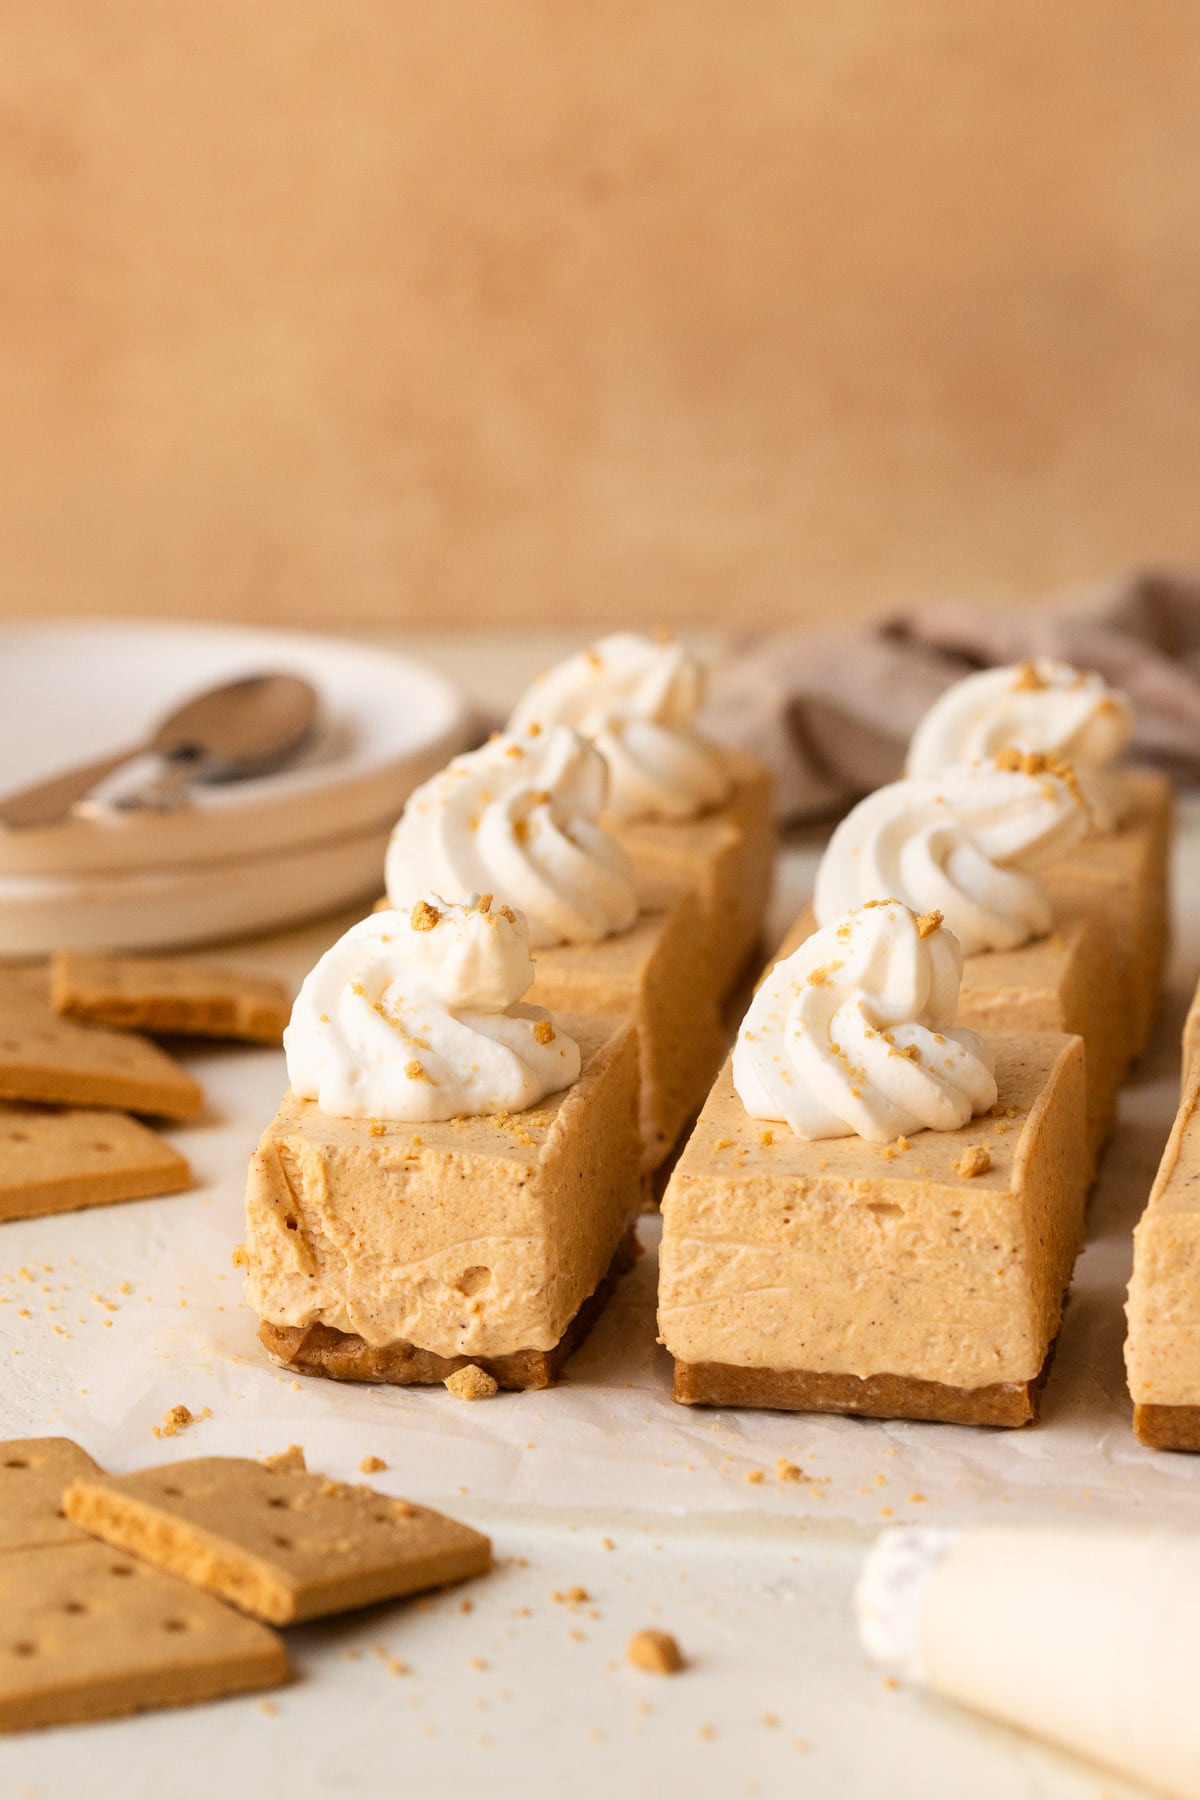 Pumpkin cheesecake bars sliced and topped with piped dollops of whipped cream.